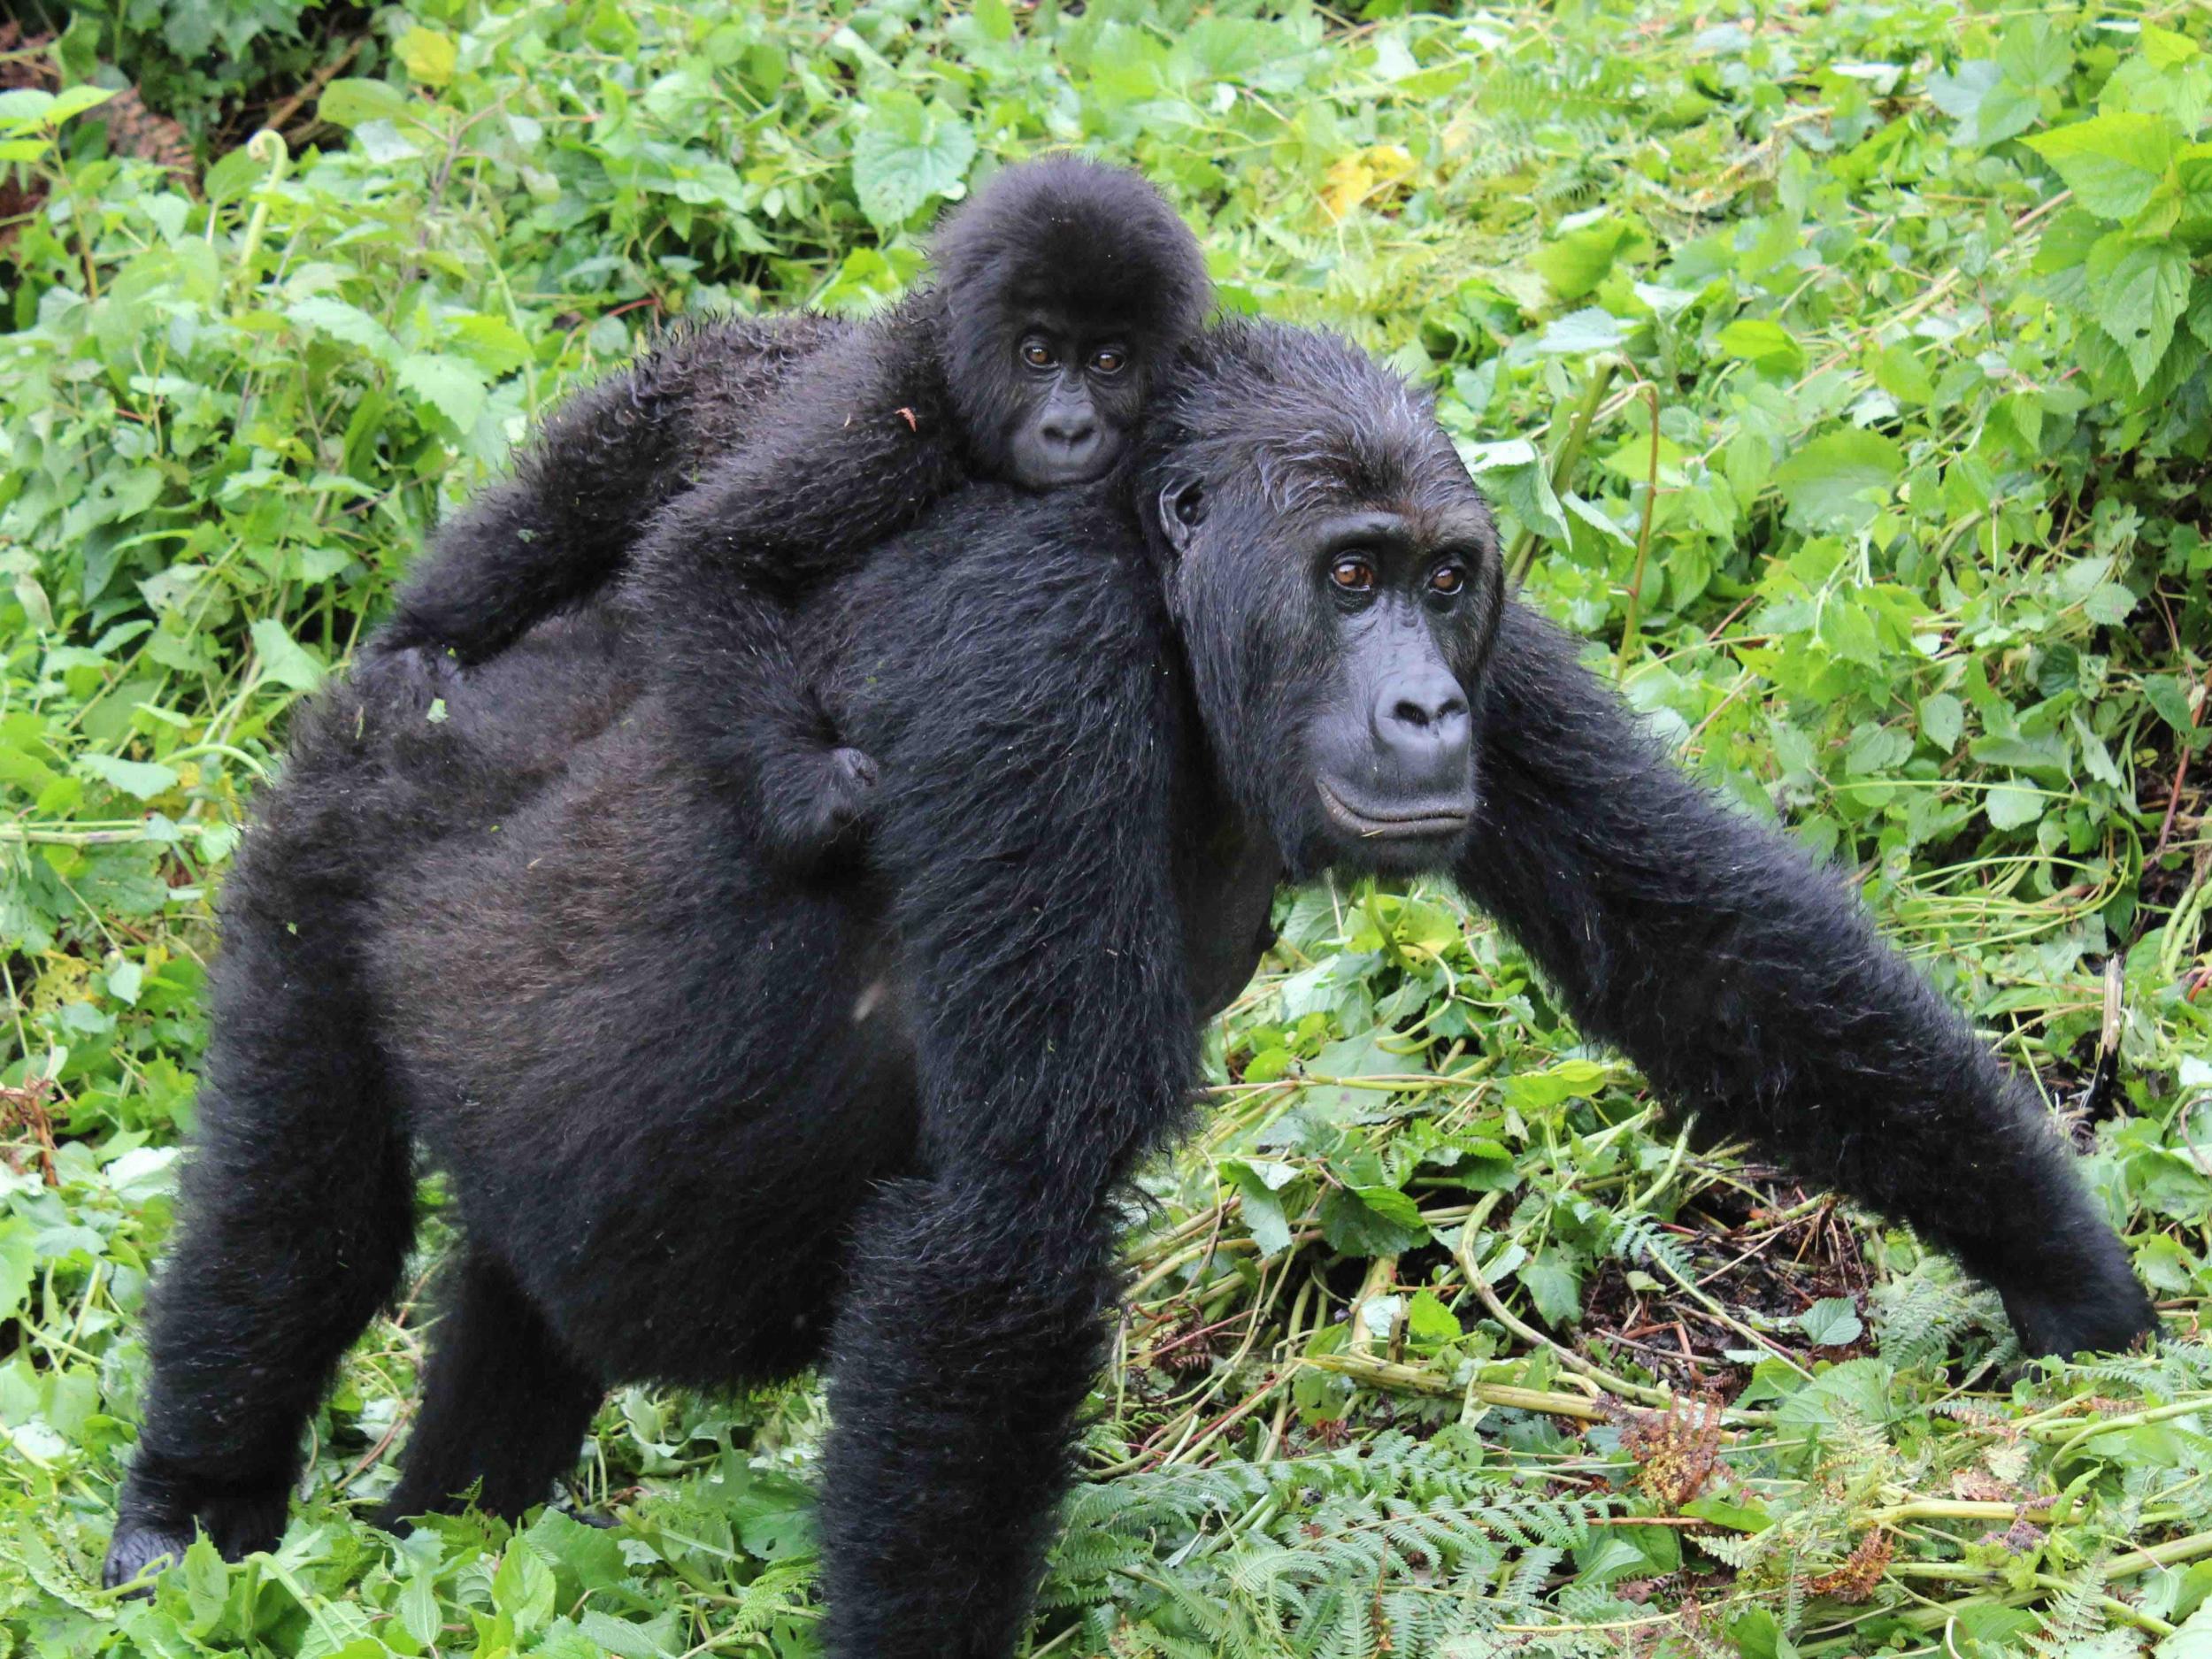 Grauer’s gorilla populations have declined by 80 per cent in recent decades